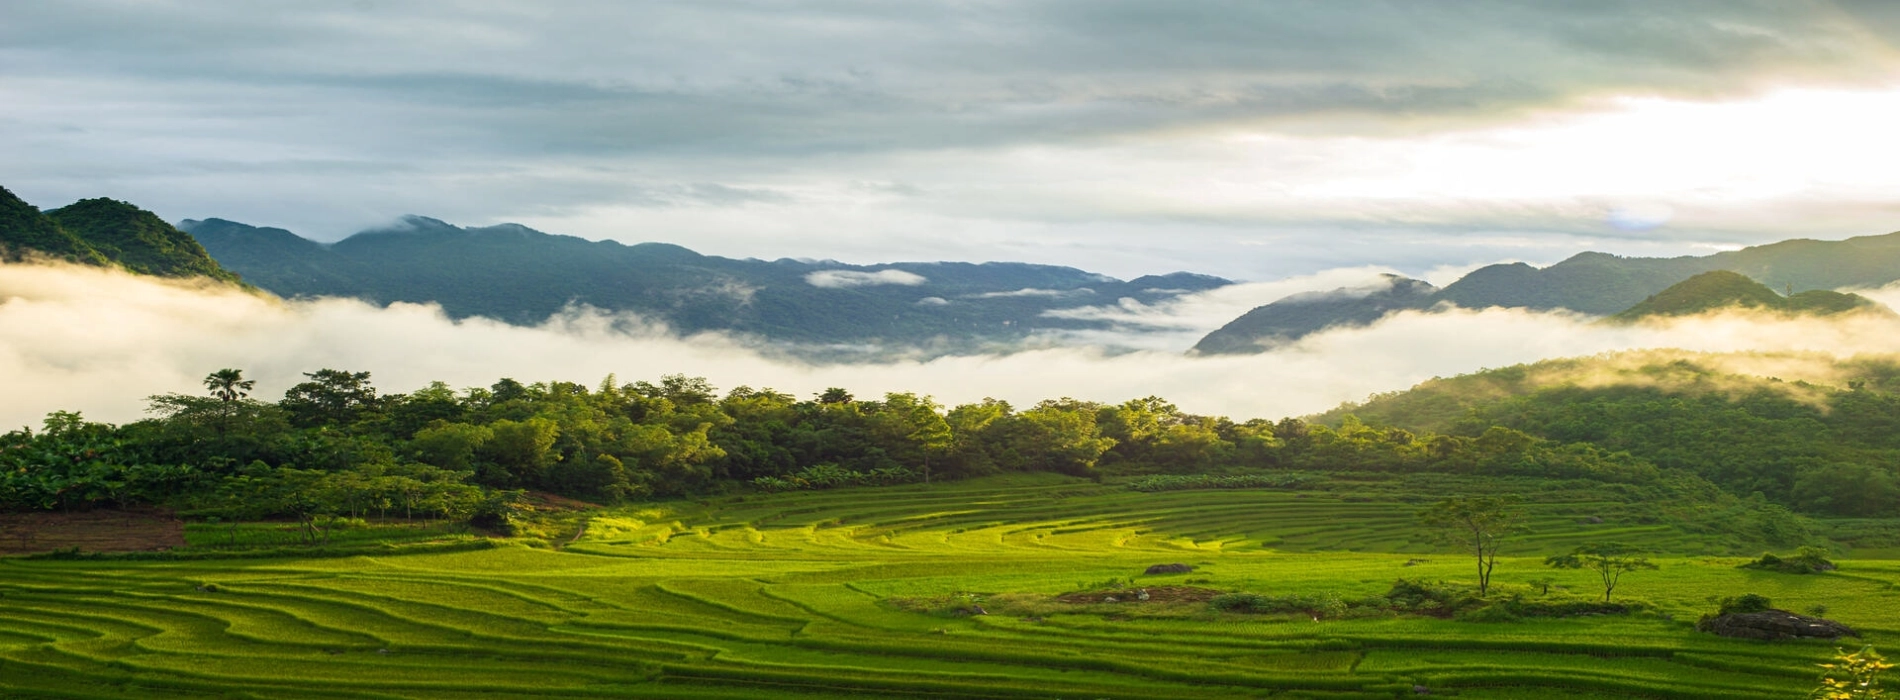 Best itineraries to travel for Northern Vietnam 5-day tour